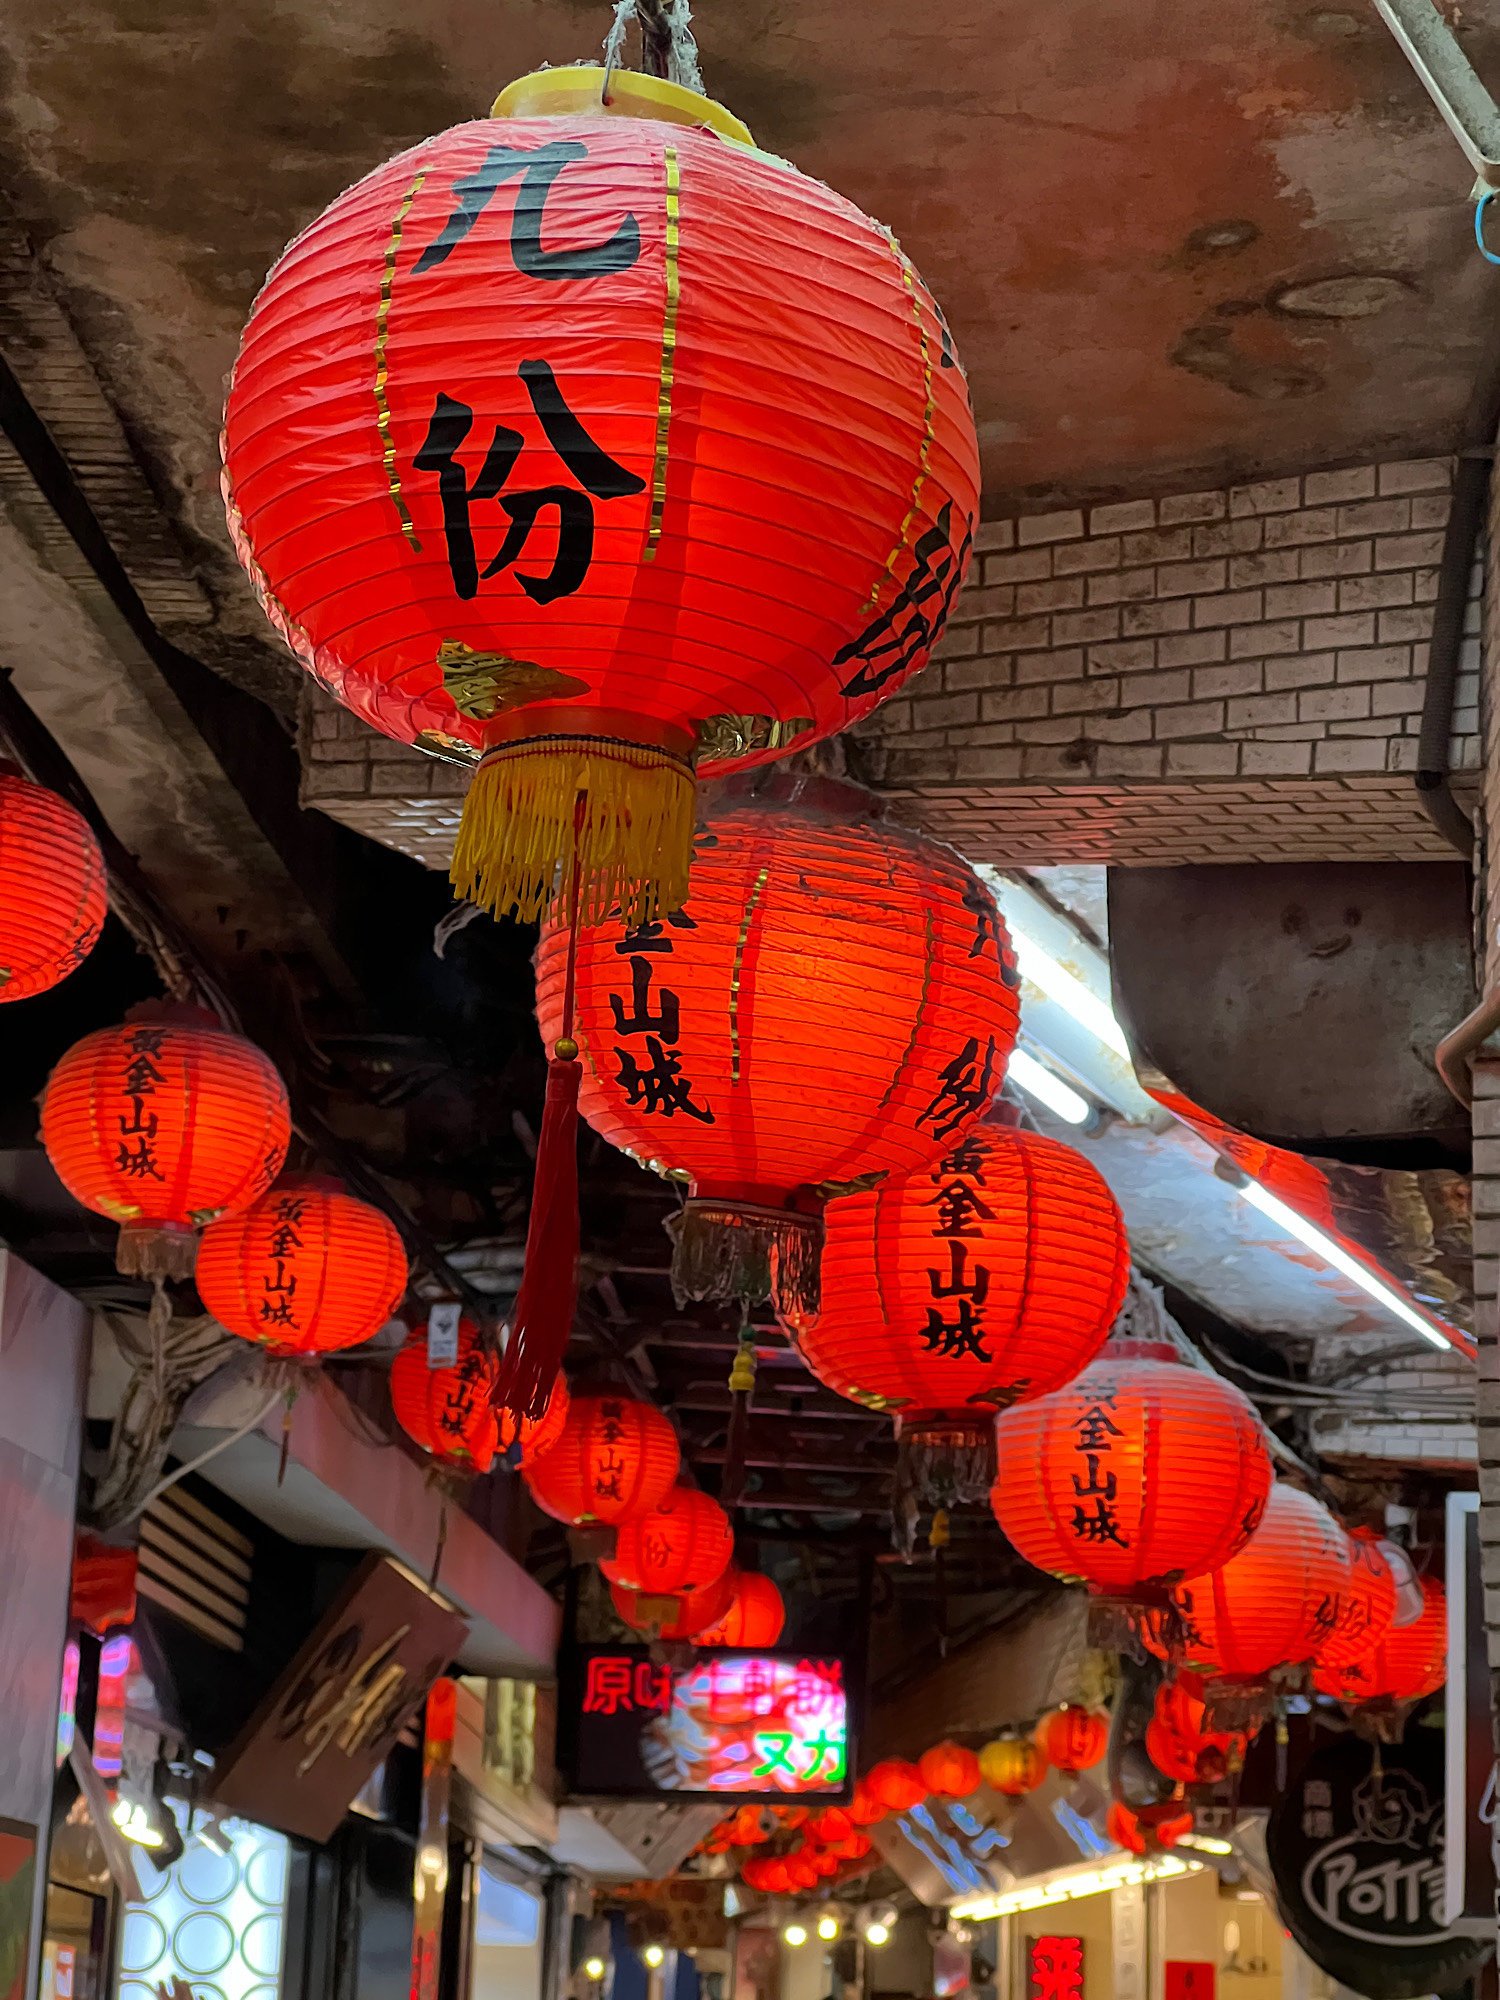 Red lanterns lining the streets above the heads of the (very crowded) Jiufen Old Street shopping area. The lantern in the foreground has the Chinese characters 九份 for Jiufen